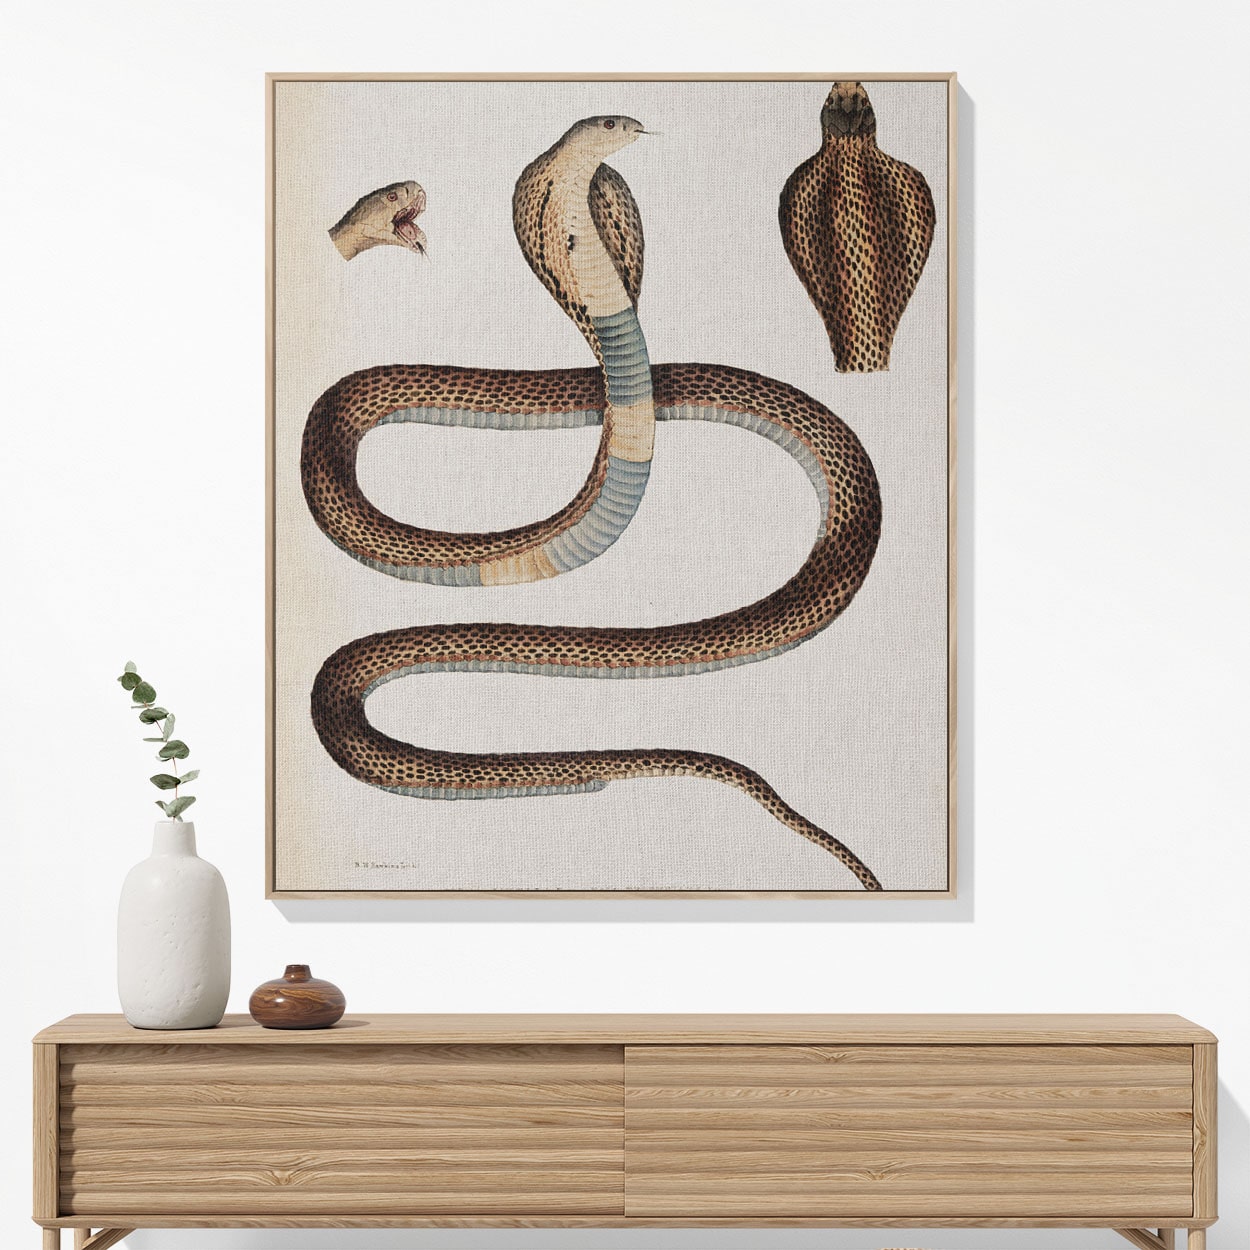 Snake Diagram Woven Blanket Hanging on a Wall as Framed Wall Art